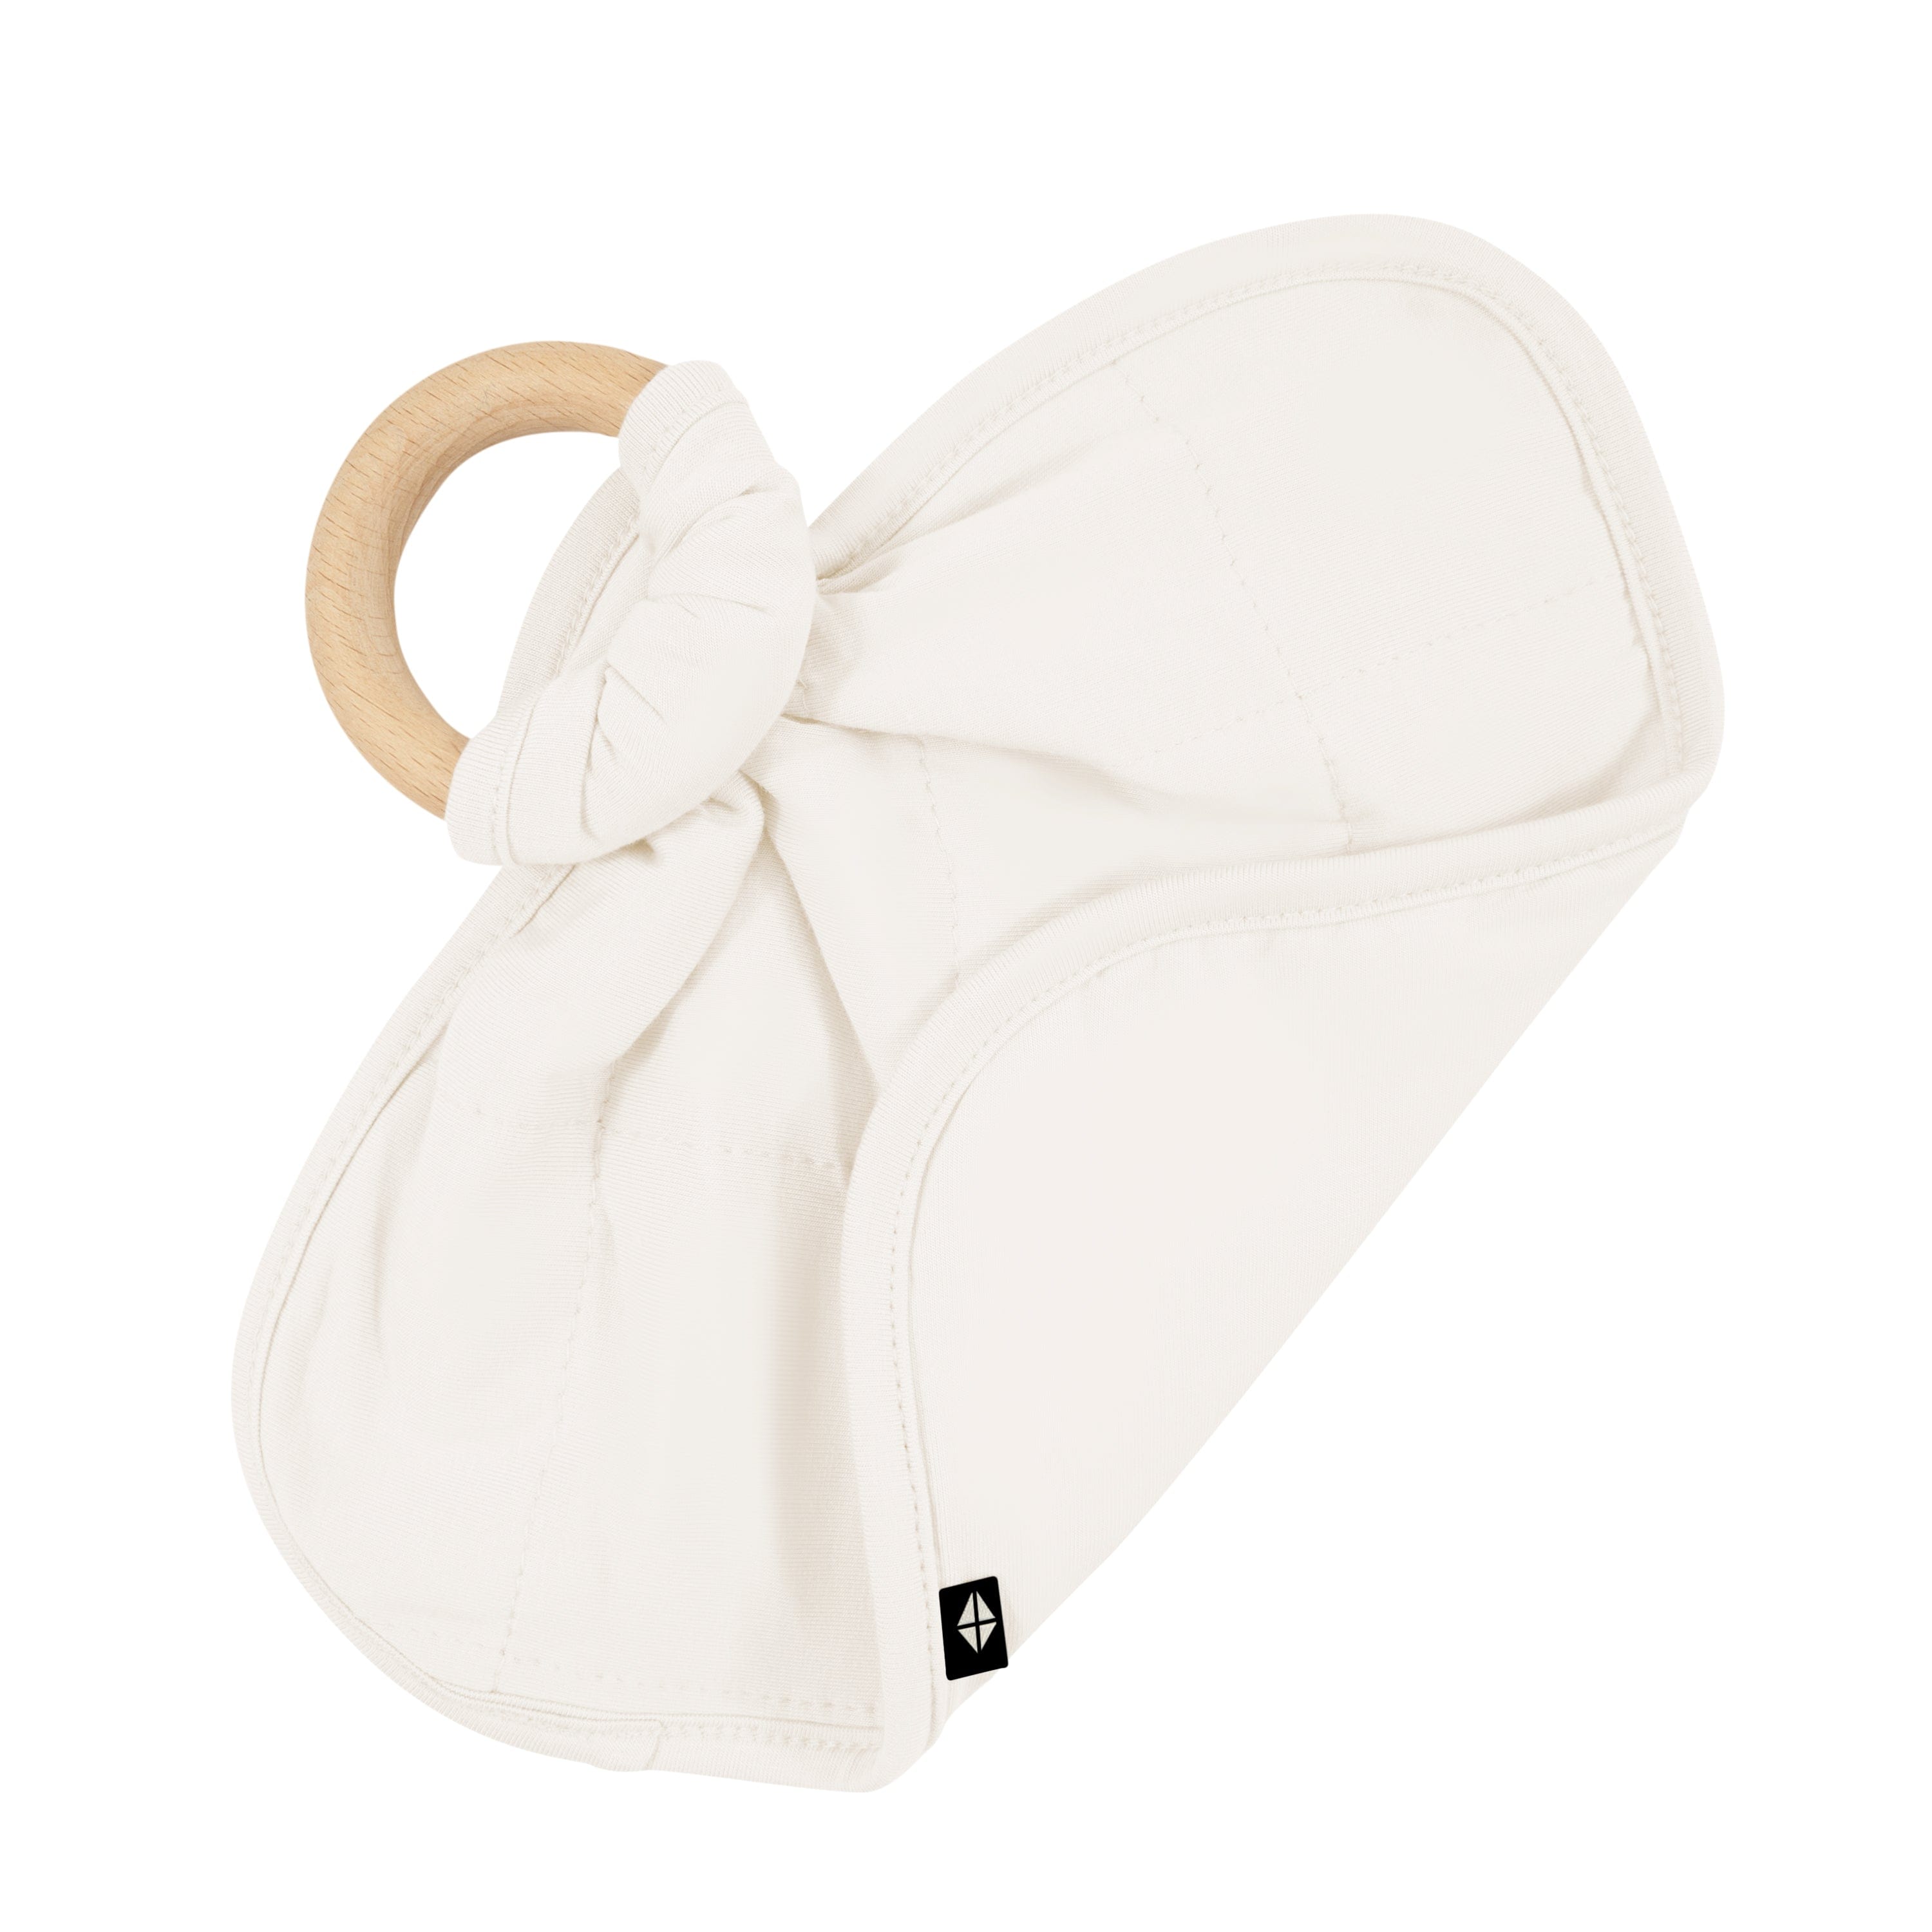 Kyte Baby Lovey Oat / Infant Lovey in Oat with Removable Wooden Teething Ring